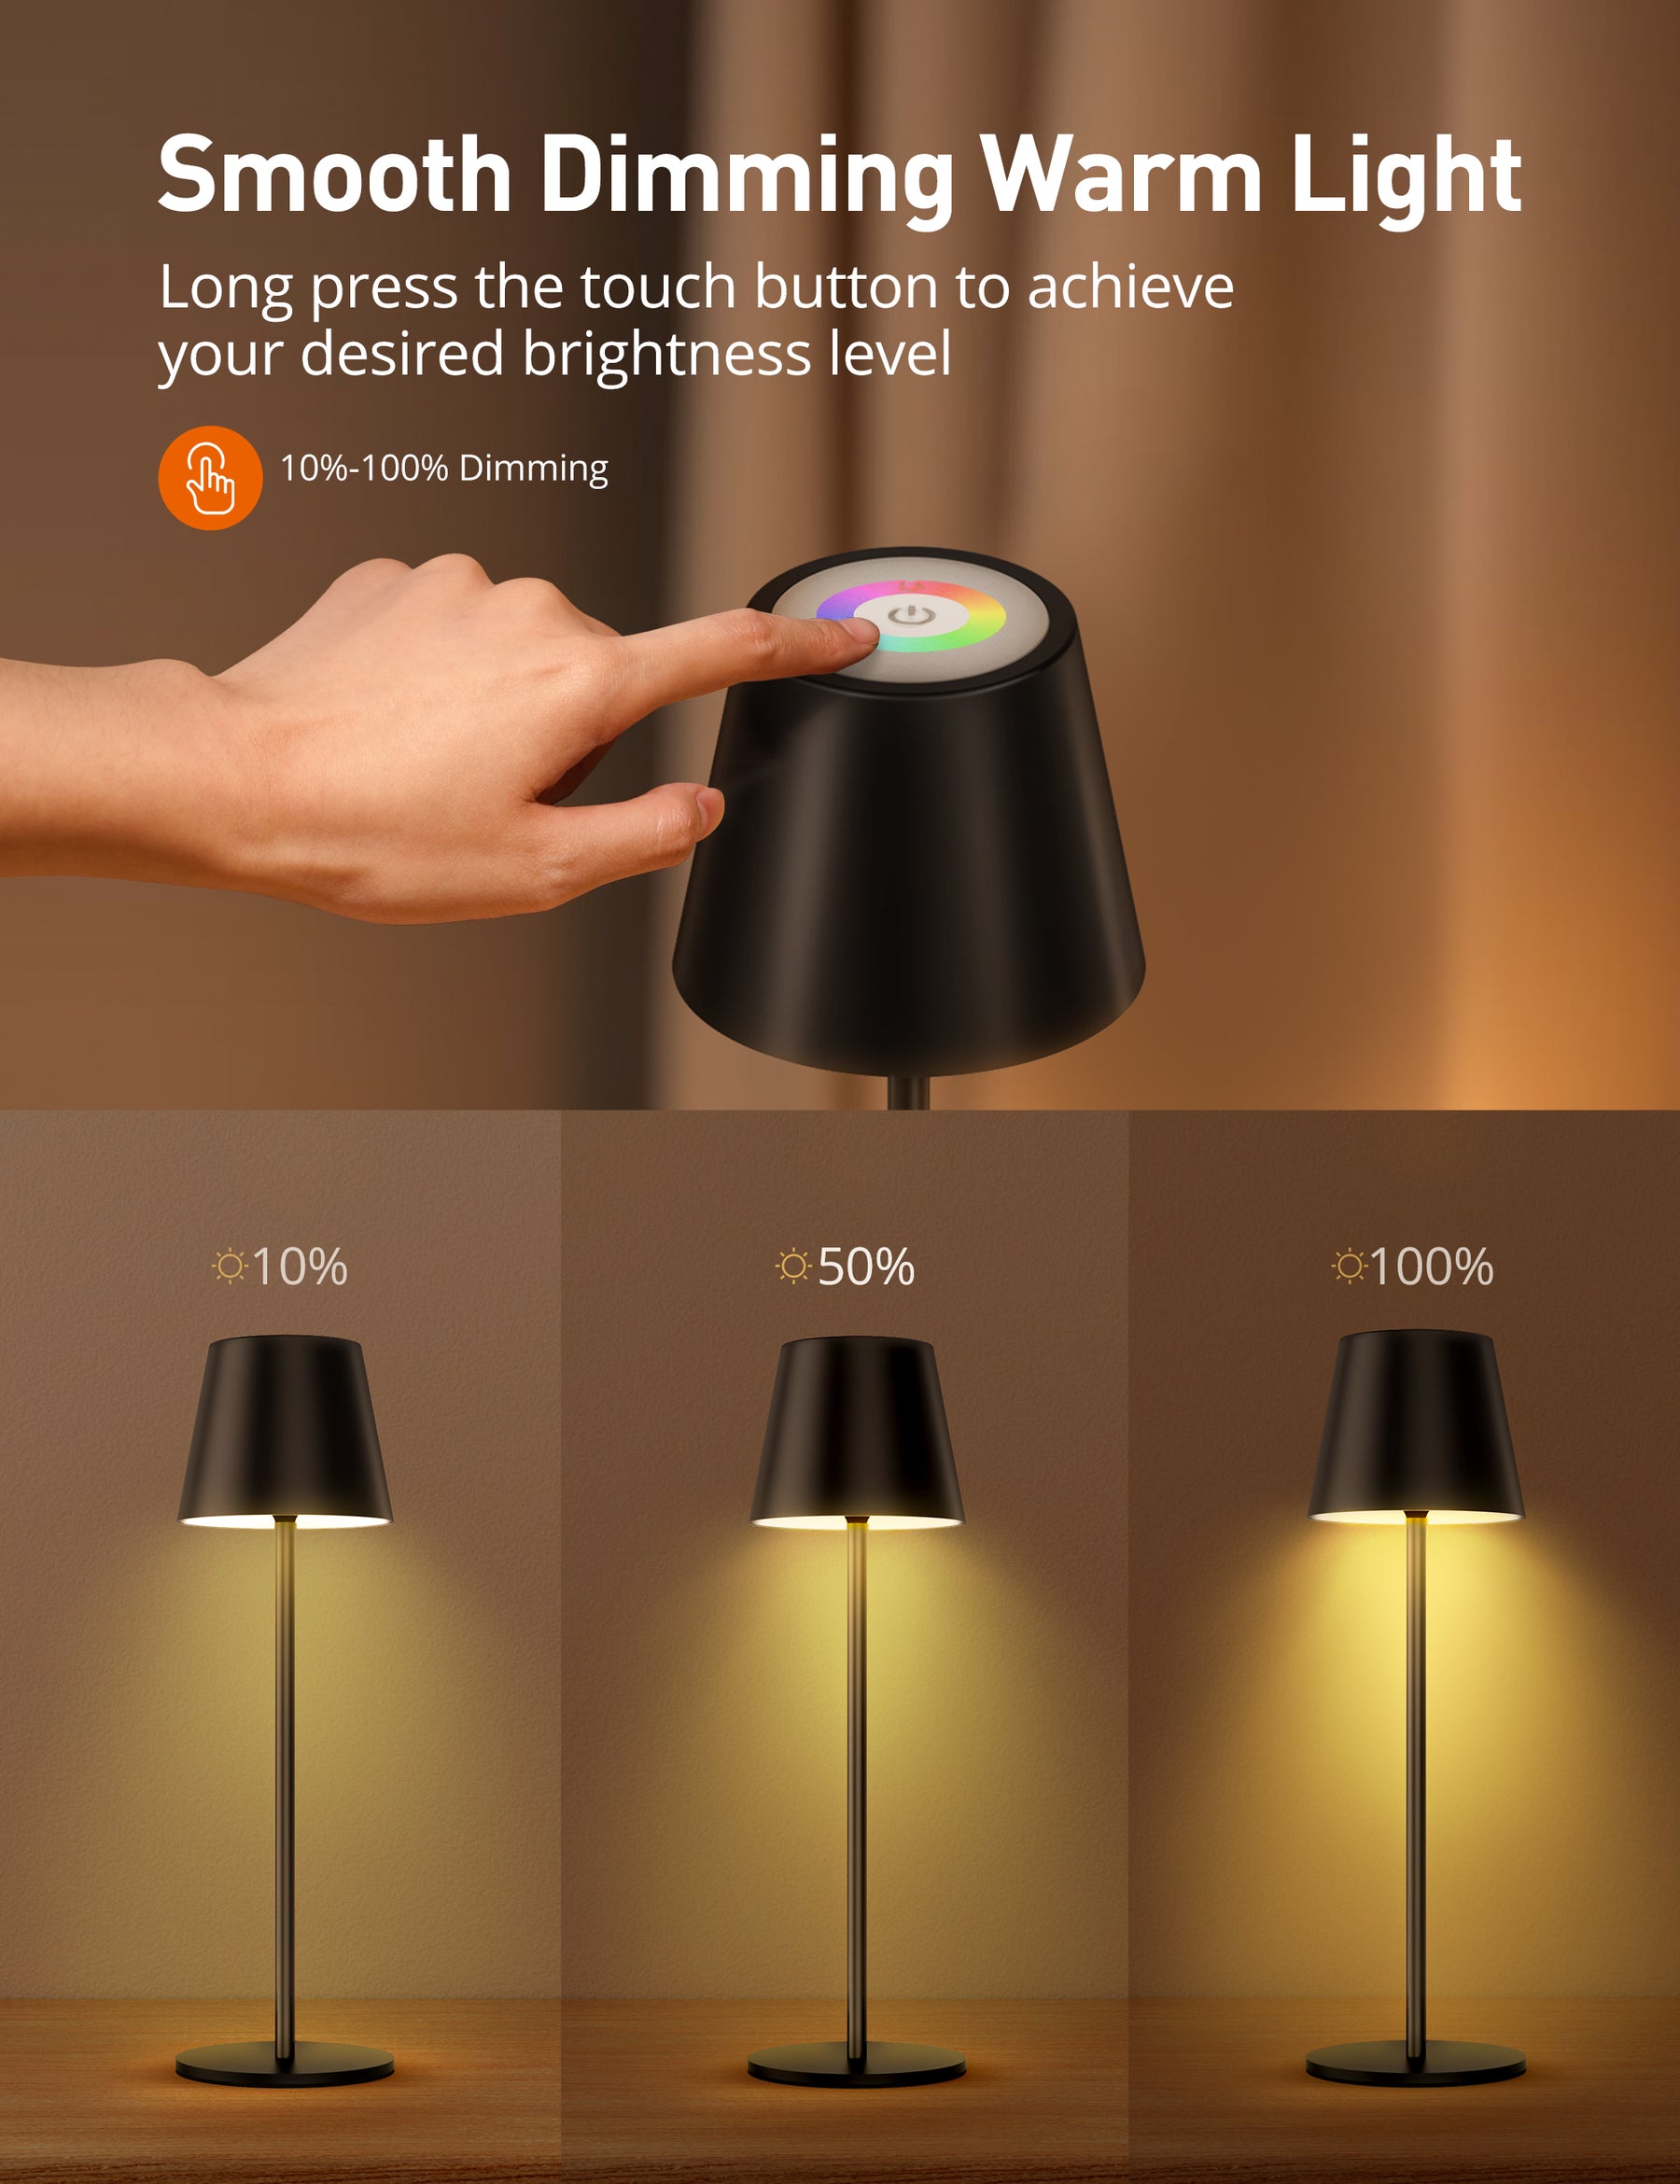 Smooth Dimming Warm Light Long press the touch button to achieve your desired brightness level